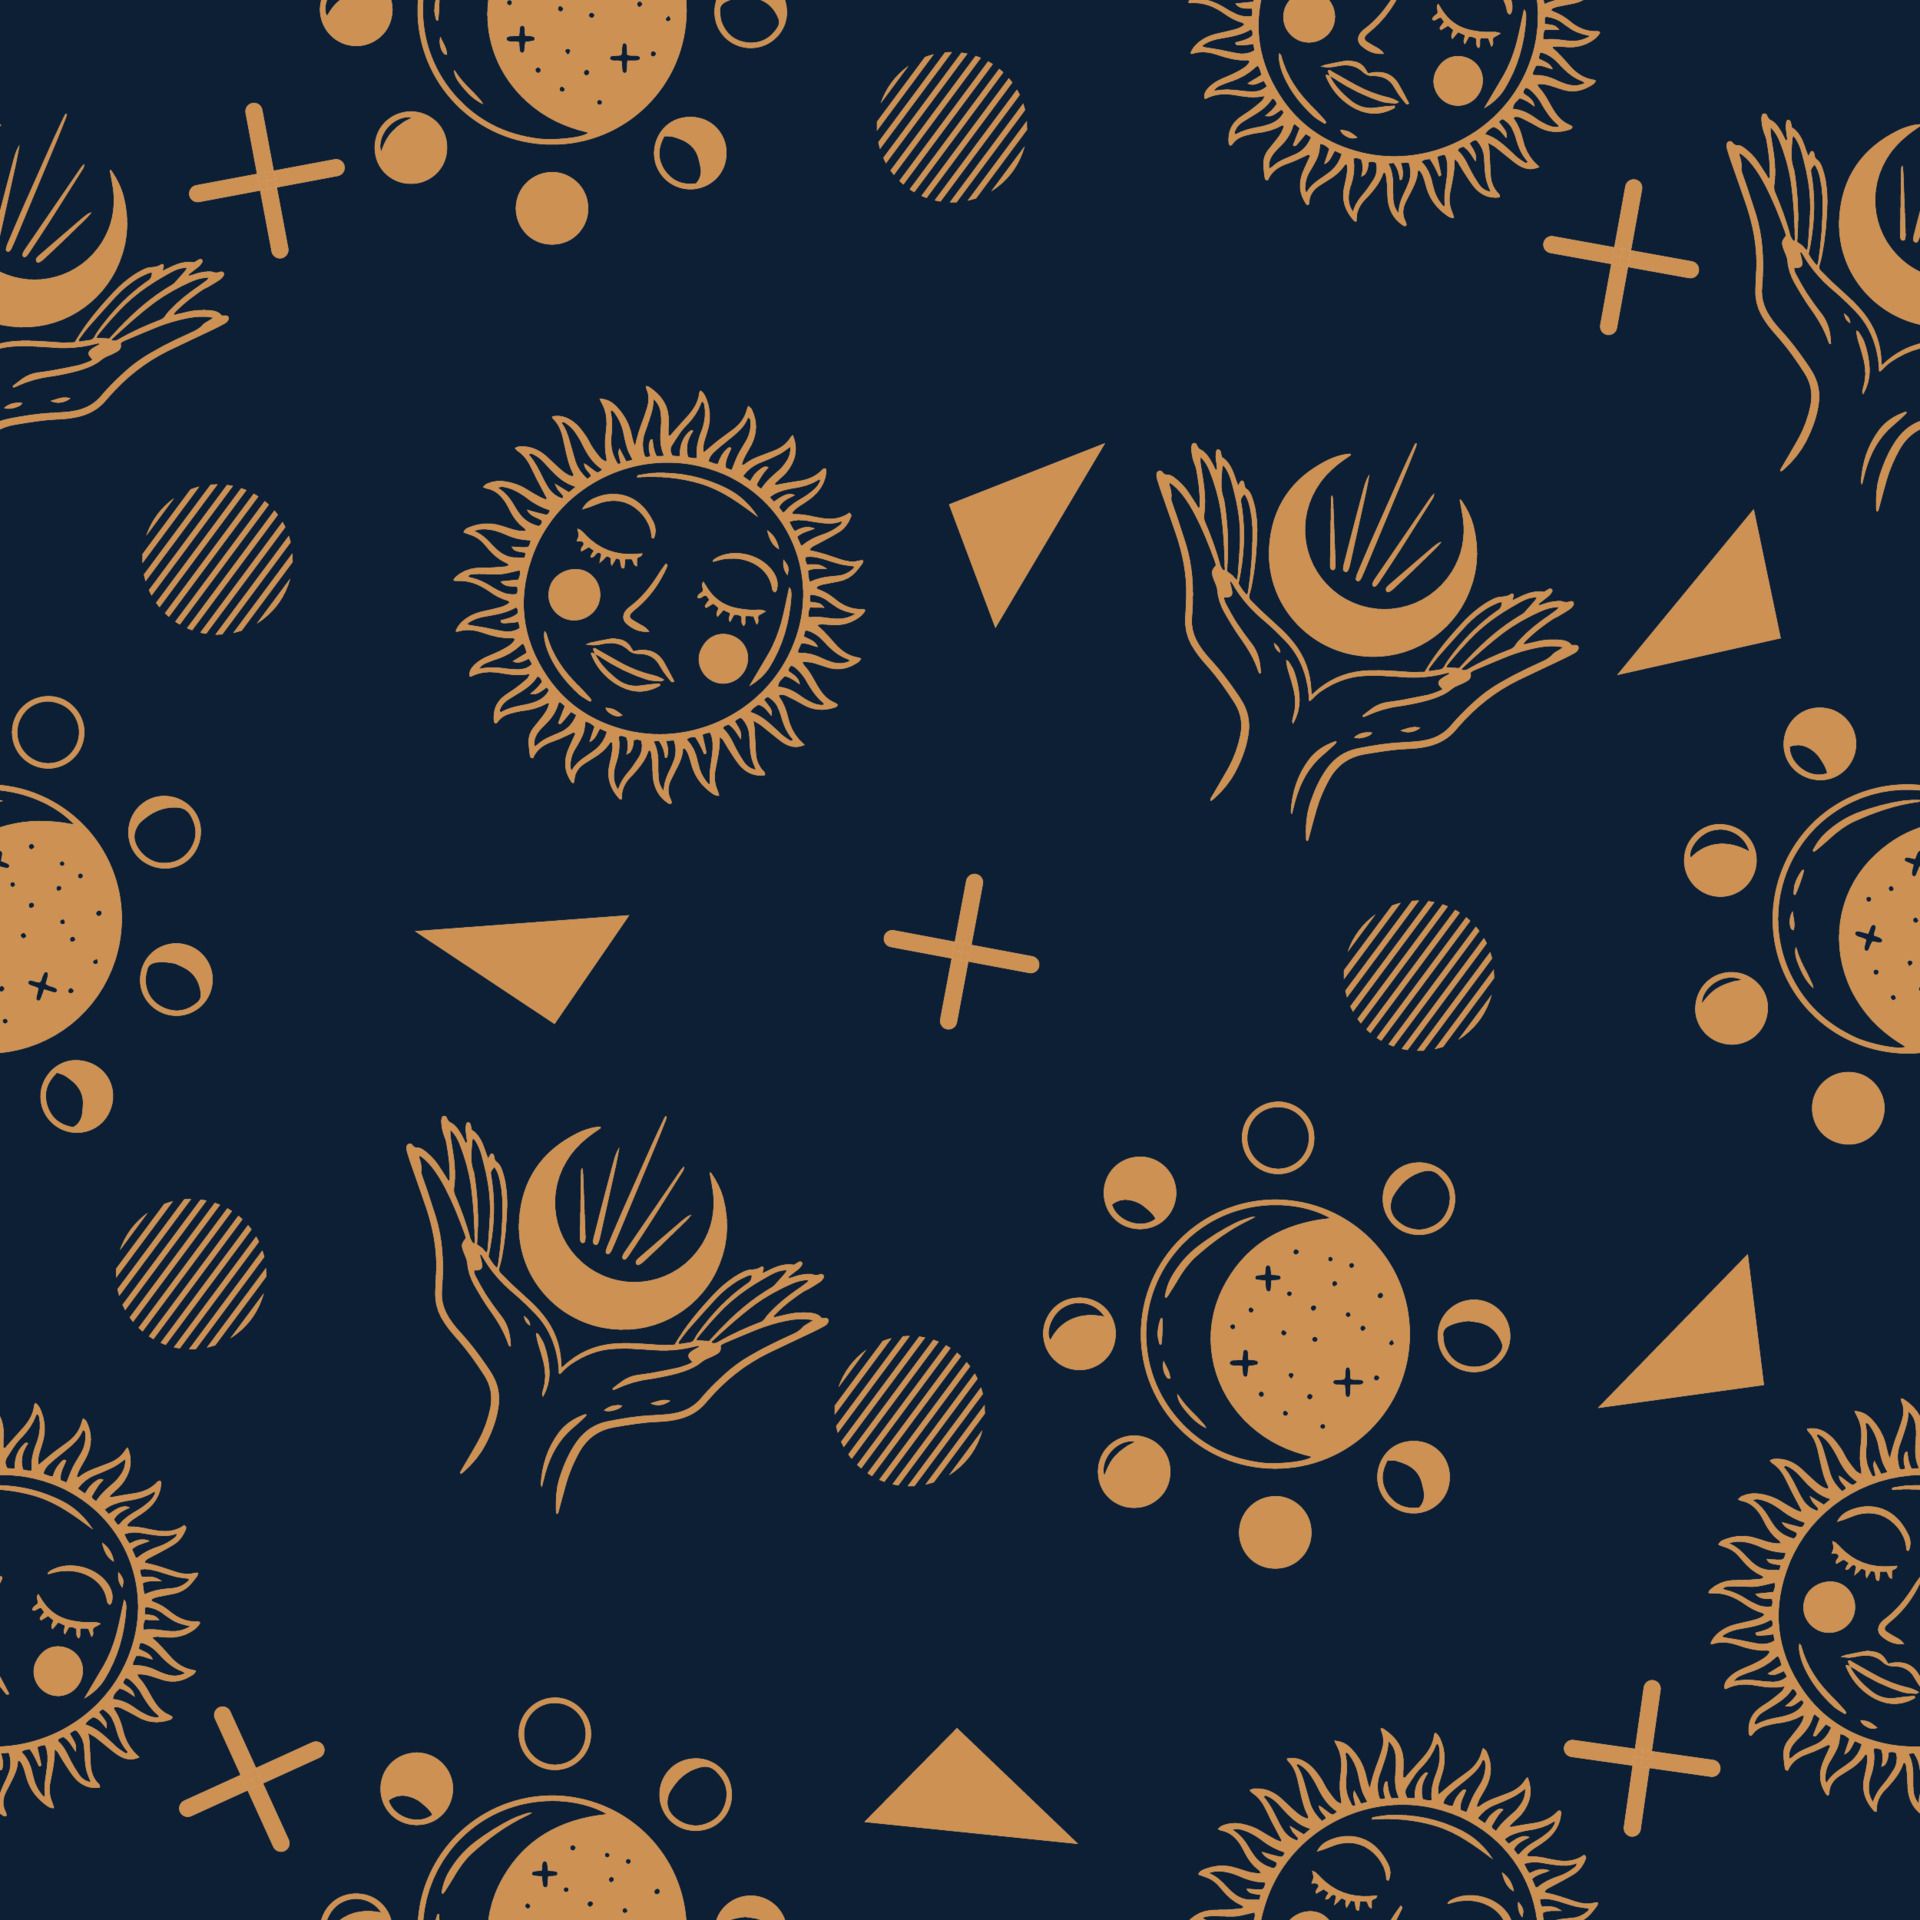 A blue background with golden suns, moons, and hands. - Dark orange